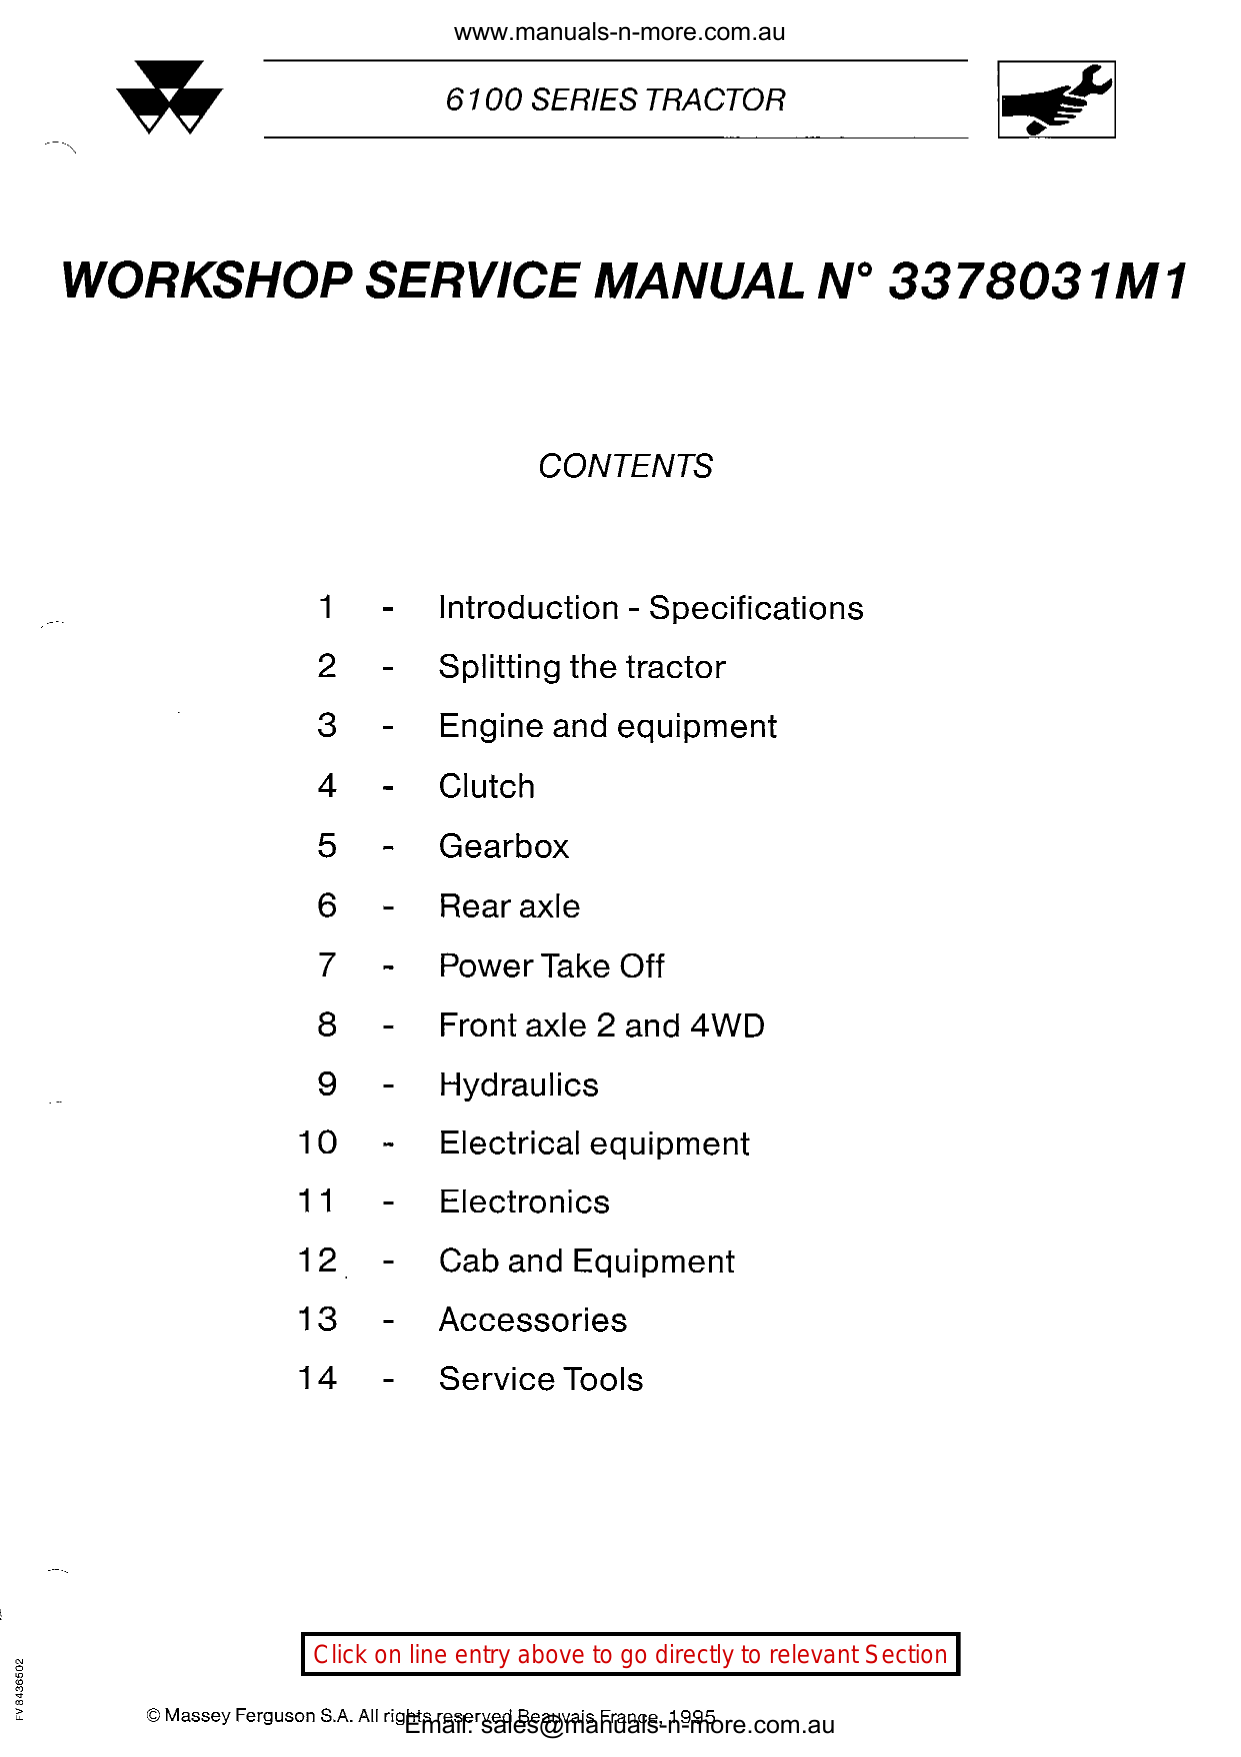 Massey Ferguson 6120, 6130, 6140, 6150, 6160, 6170, 6180, 6190 utility tractor workshop service manual Preview image 3